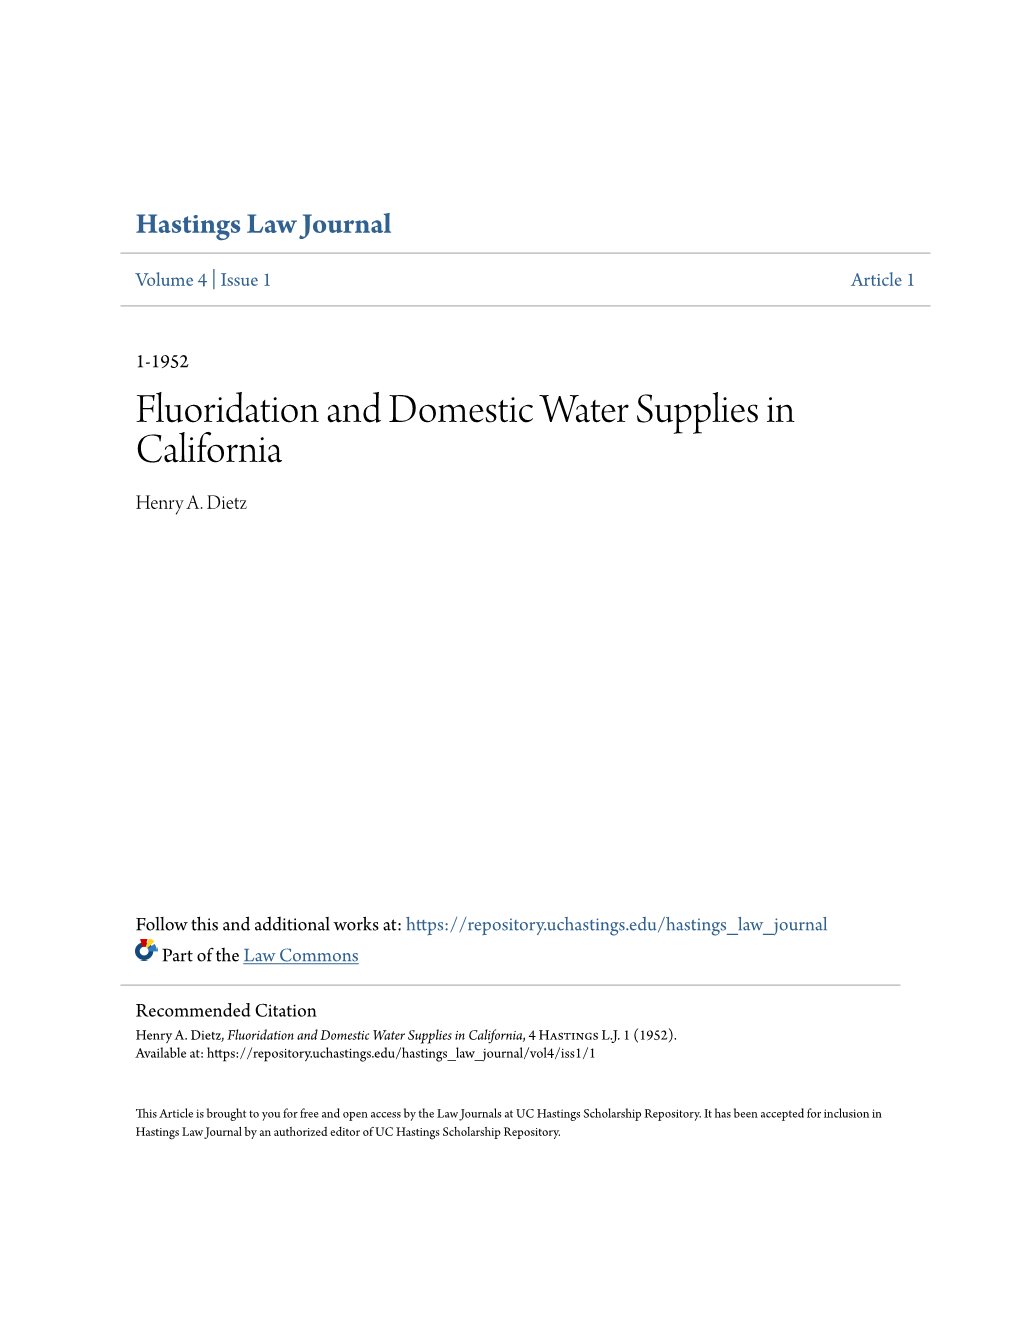 Fluoridation and Domestic Water Supplies in California Henry A